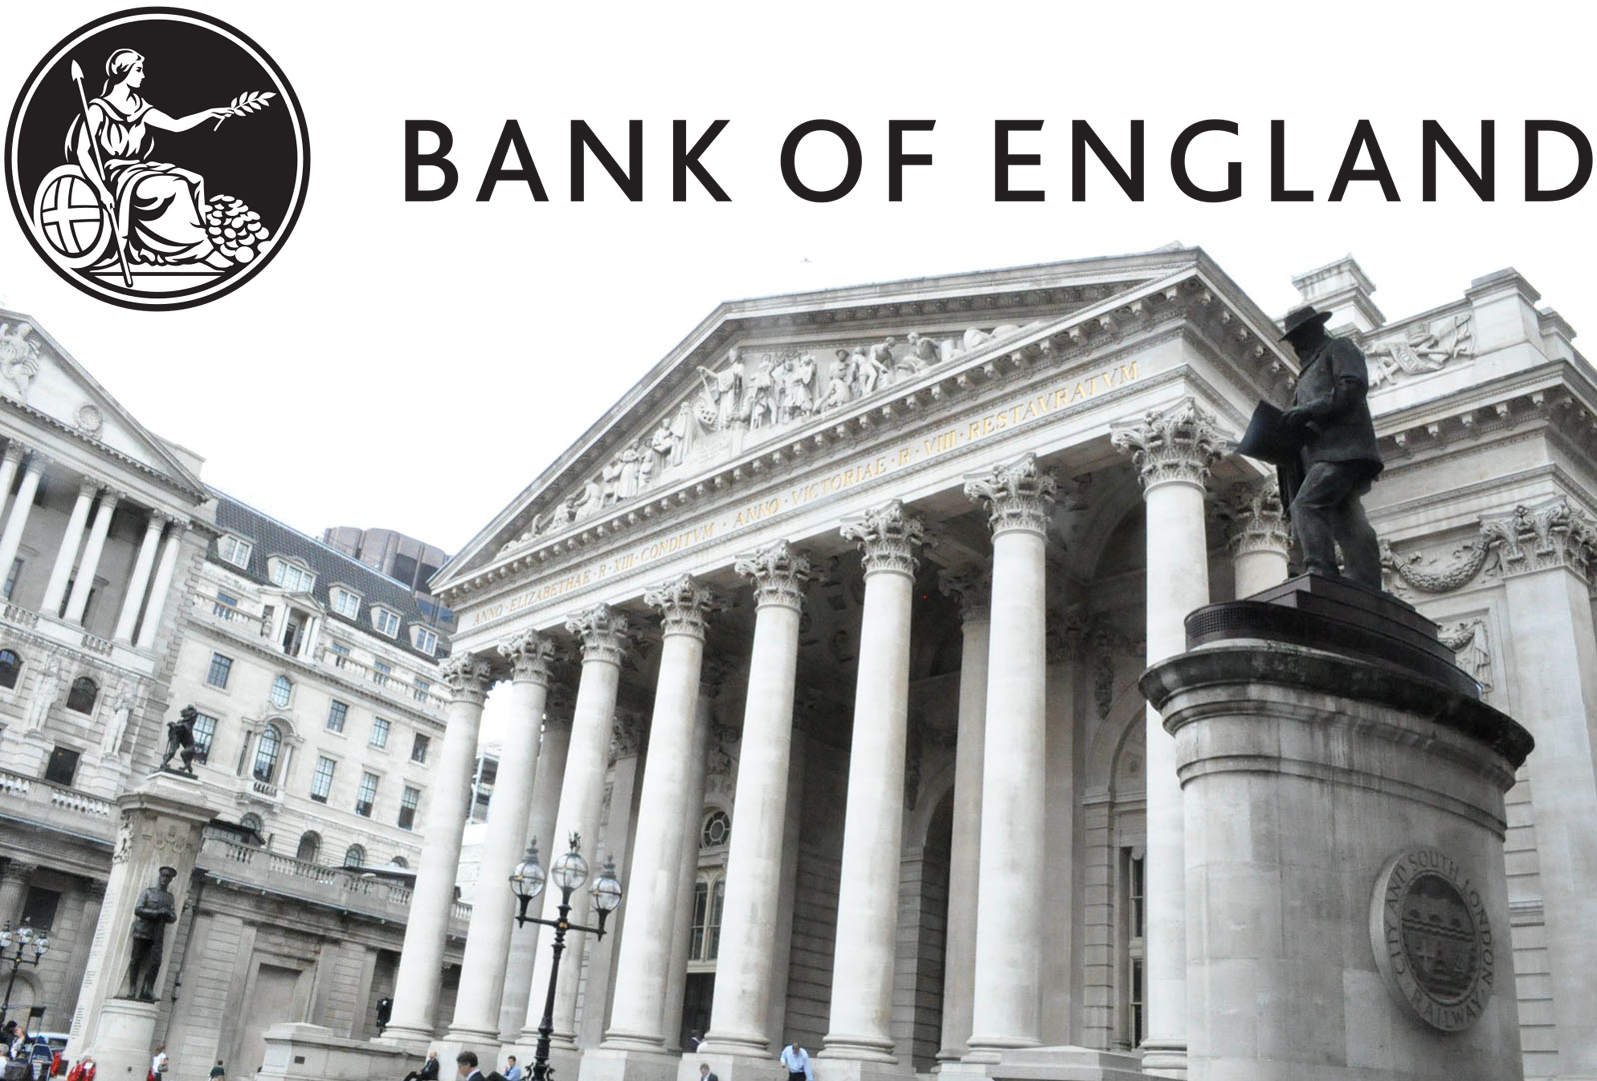 Frothy Stock Market Valuations, a Dash for Cash and Digital Money – All on Bank of England’s Risk Radar